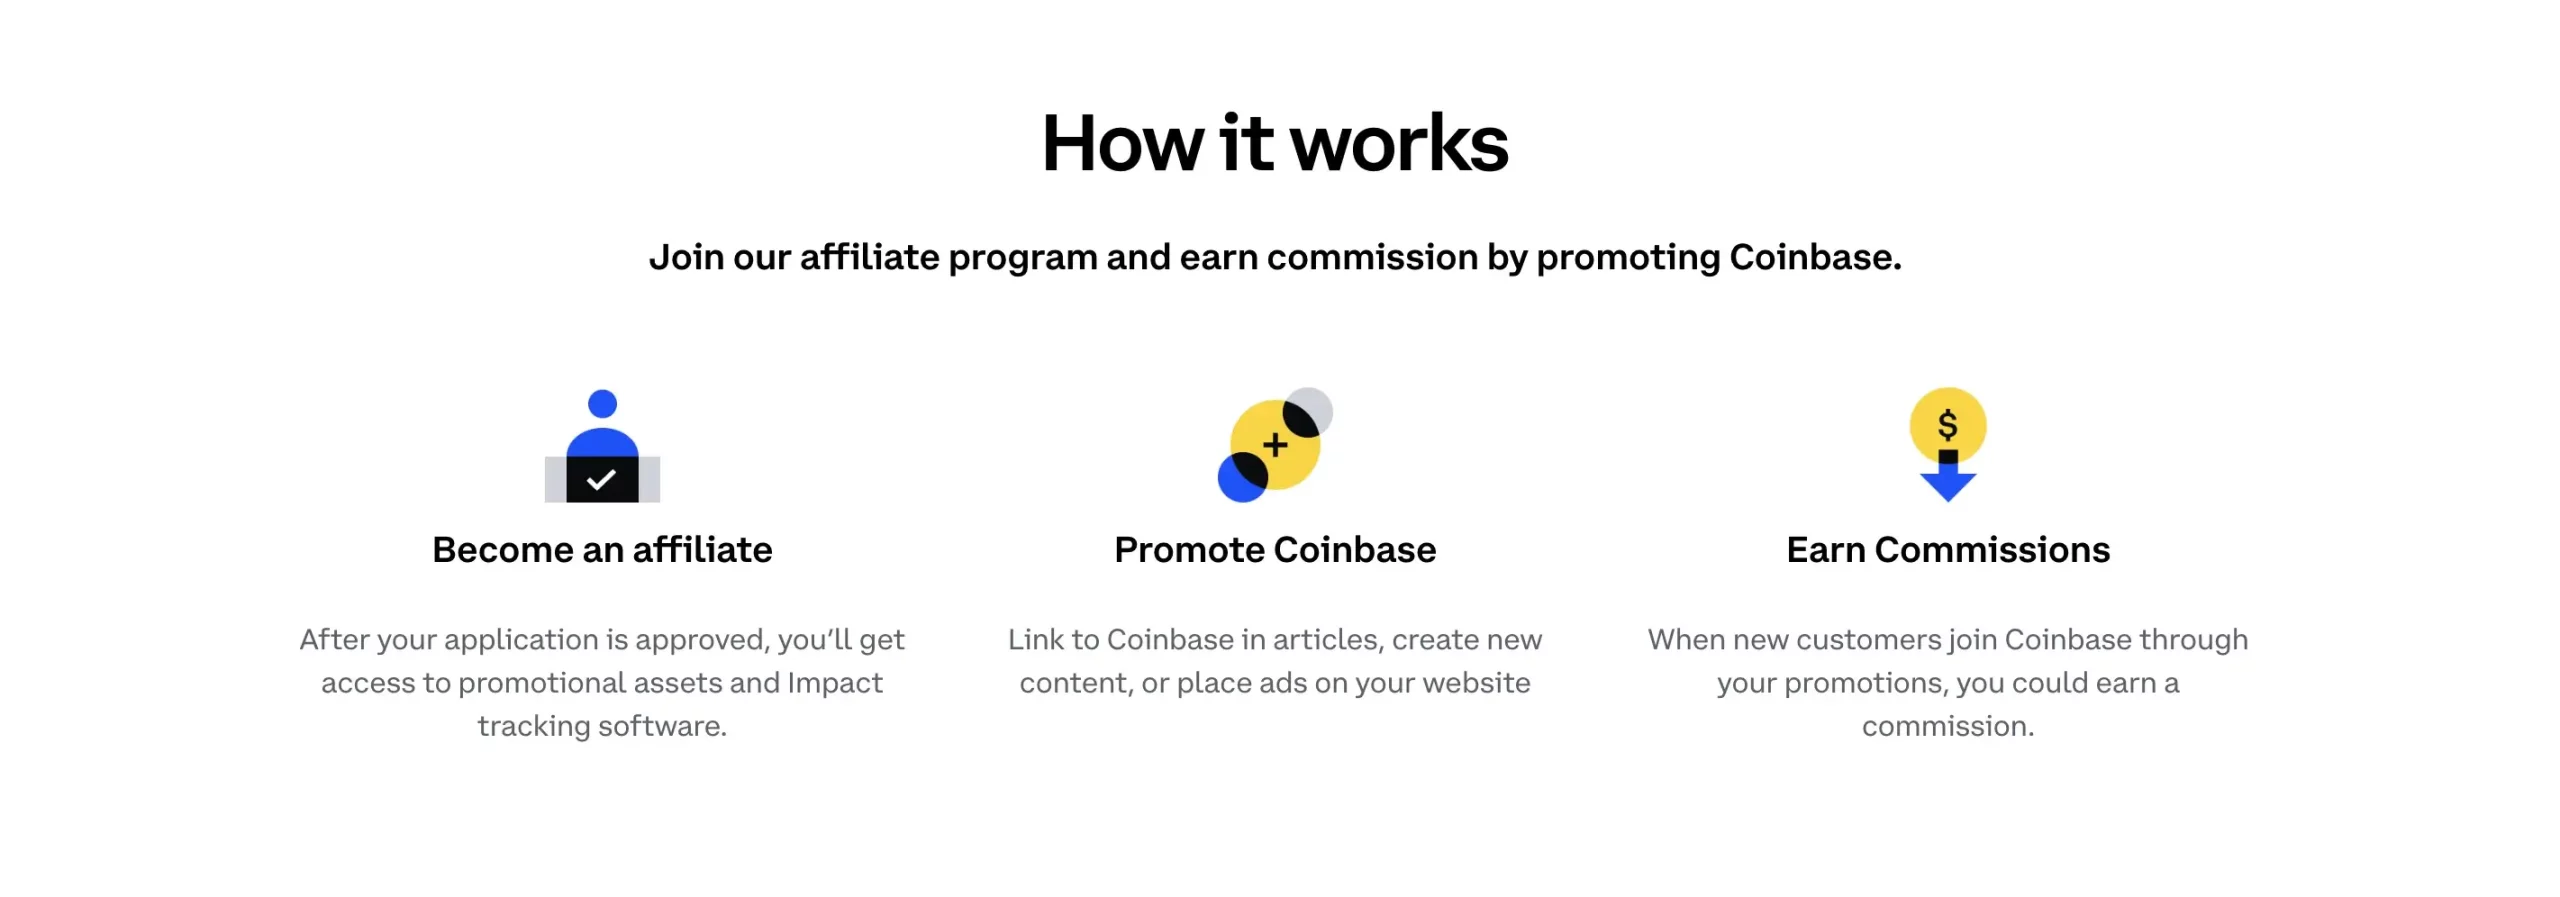 How does the Affiliate Program work